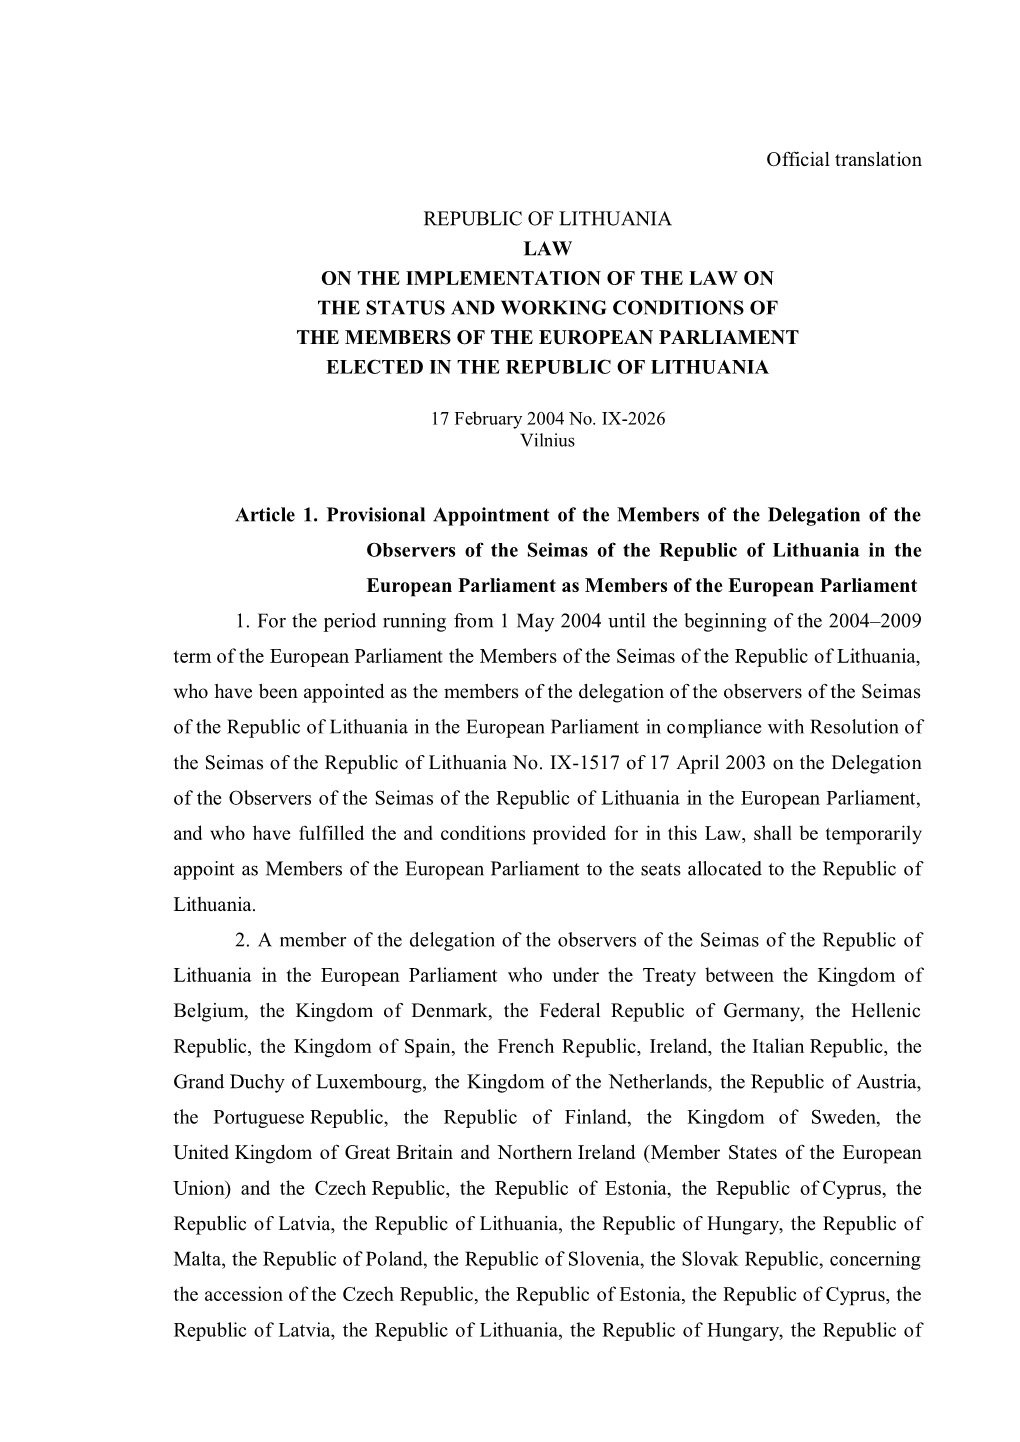 Official Translation REPUBLIC of LITHUANIA LAW on THE